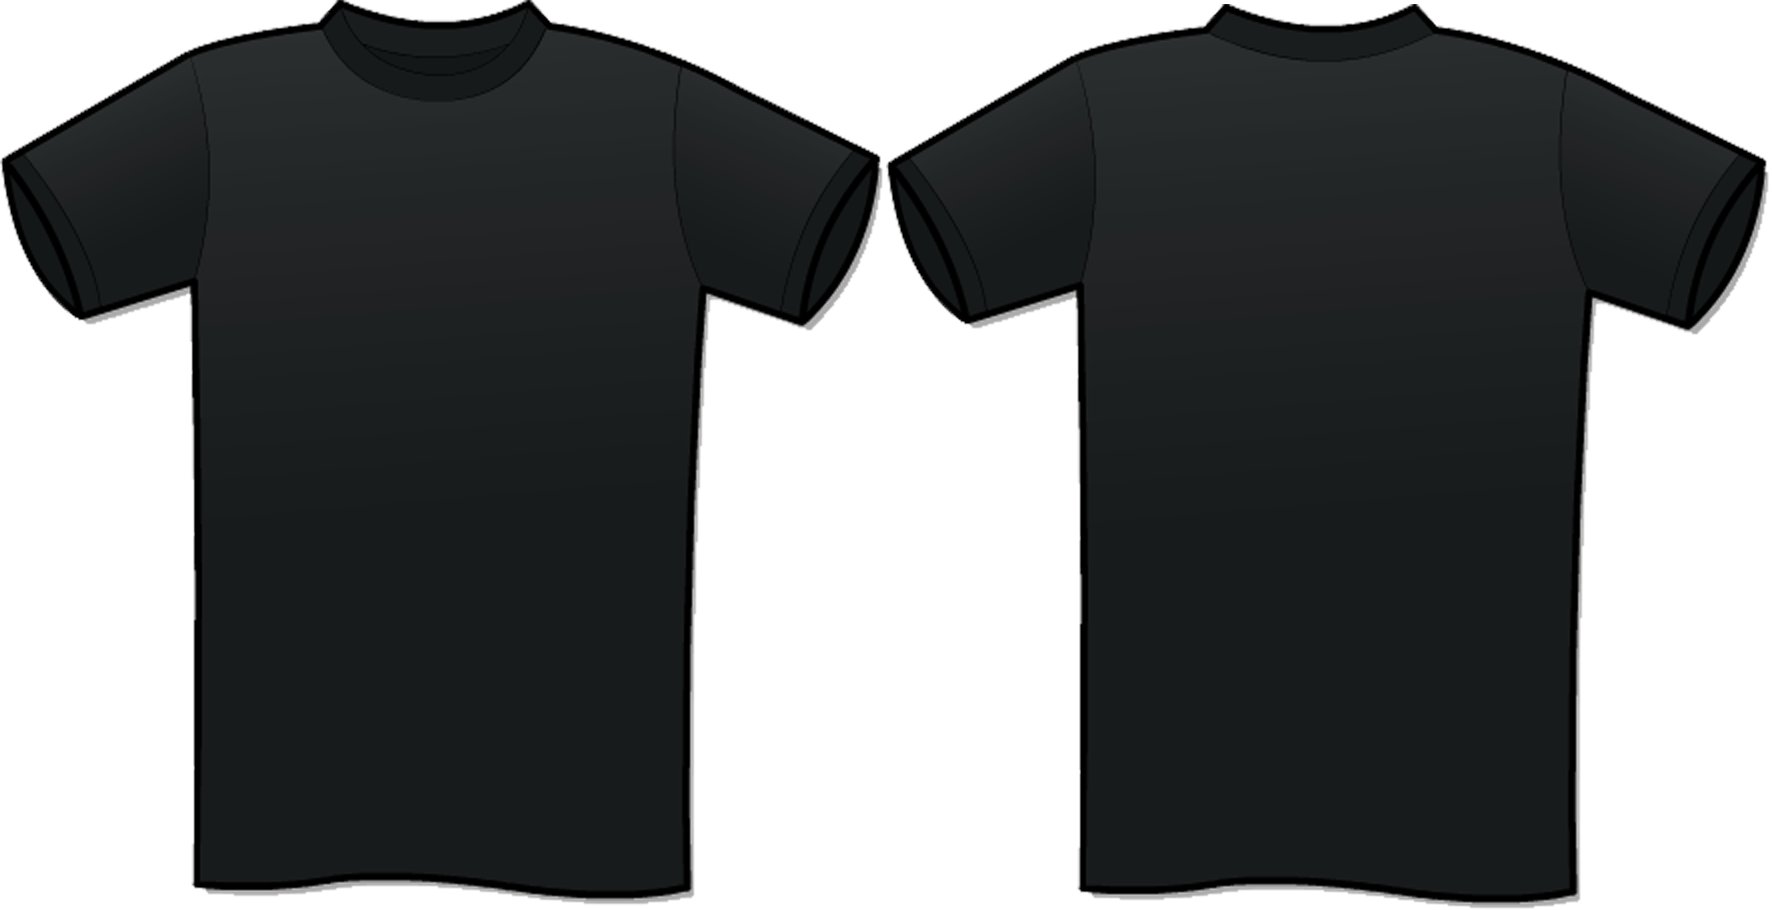 Download Tshirt Template - ClipArt Best